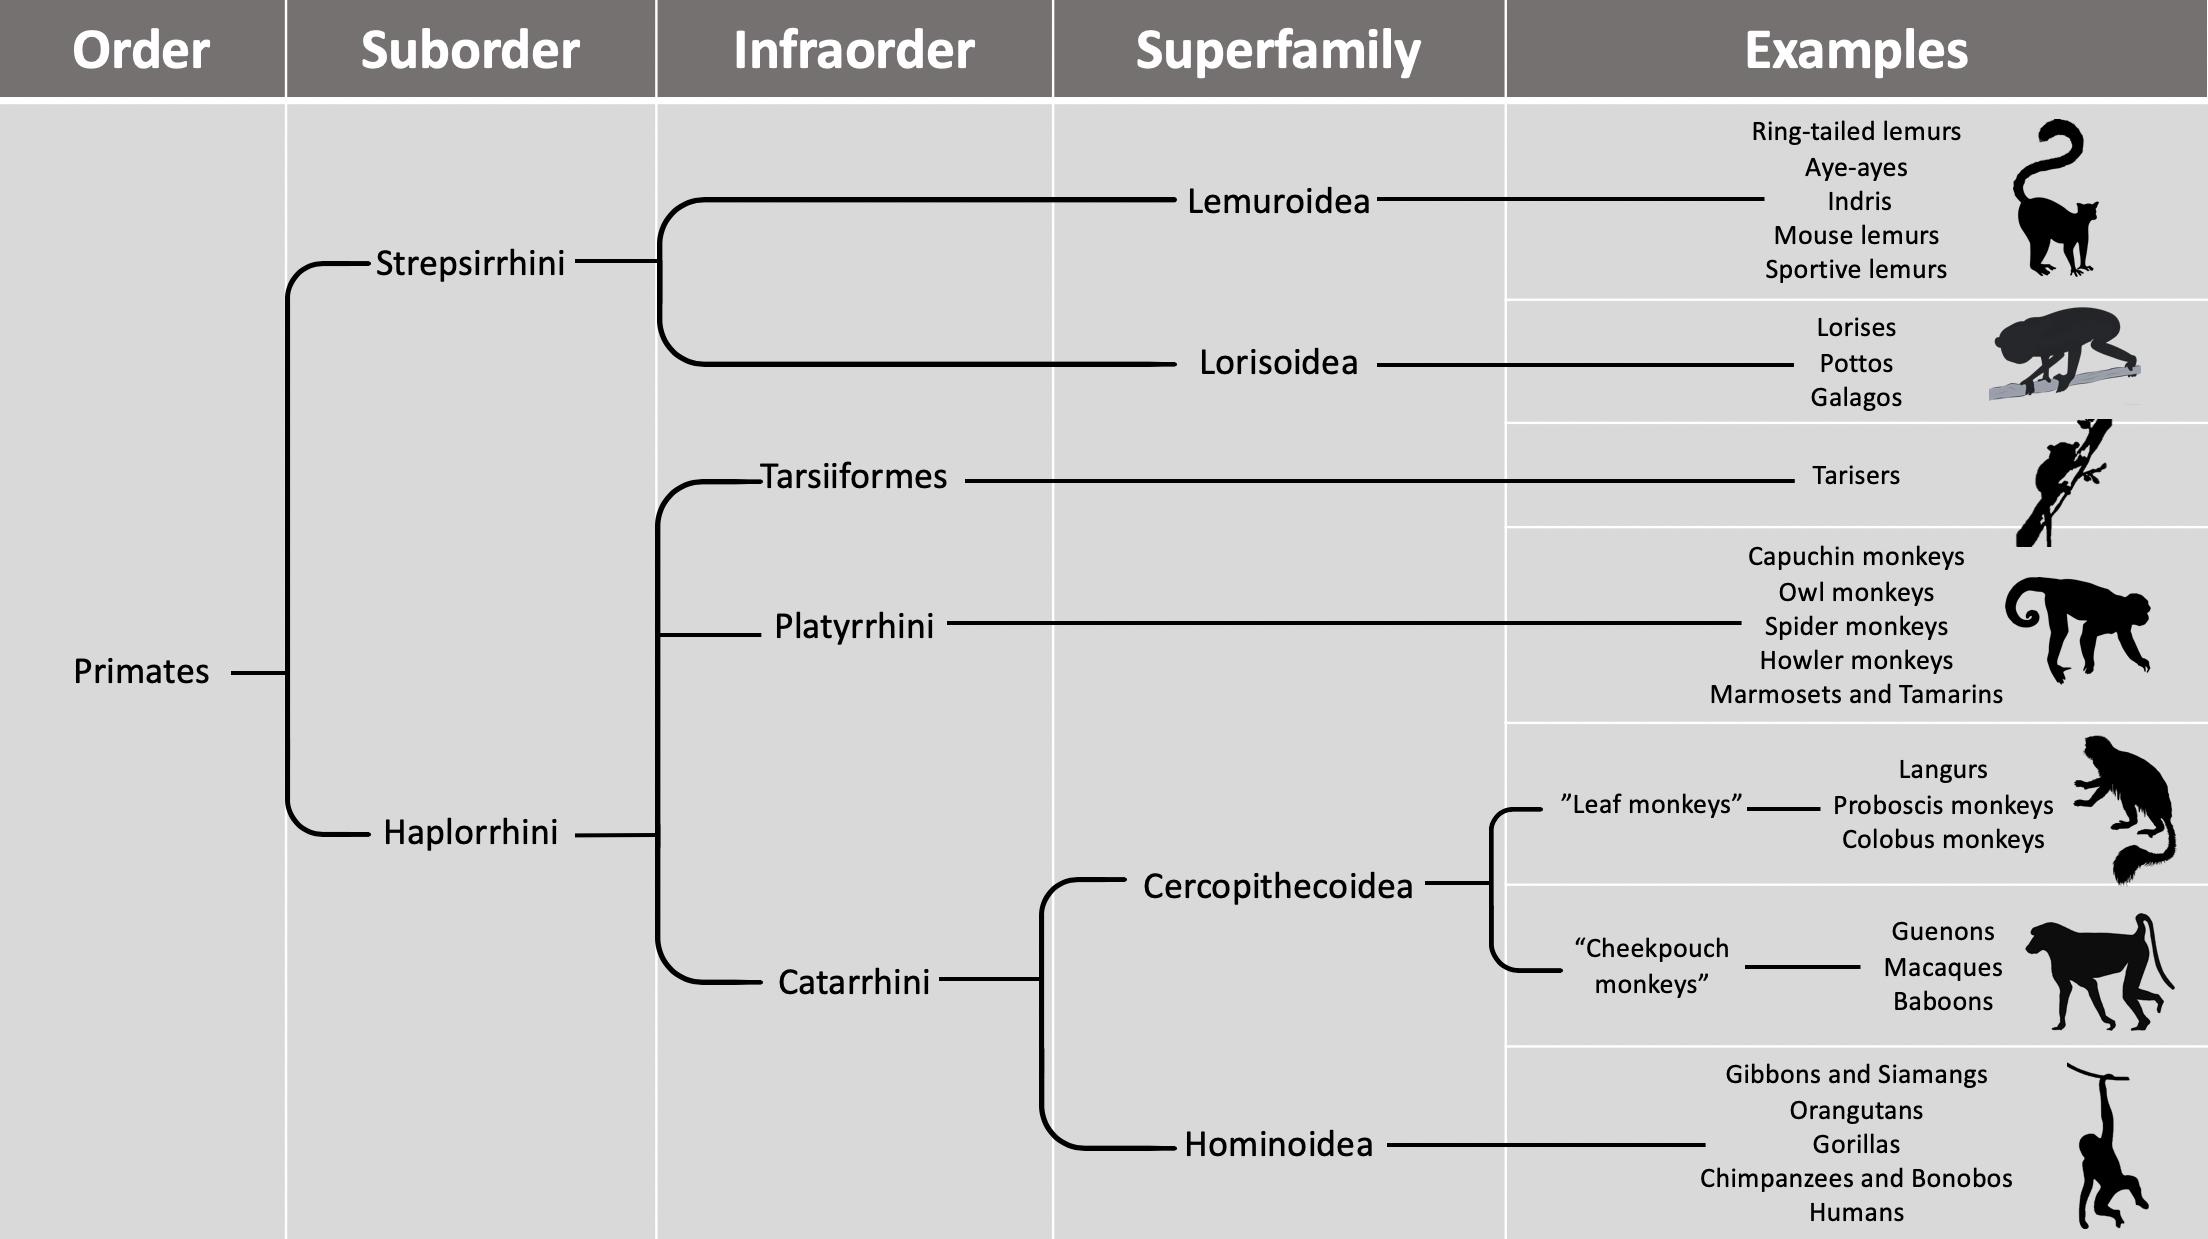 Taxonomy chart showing the major groups of primate taxa.